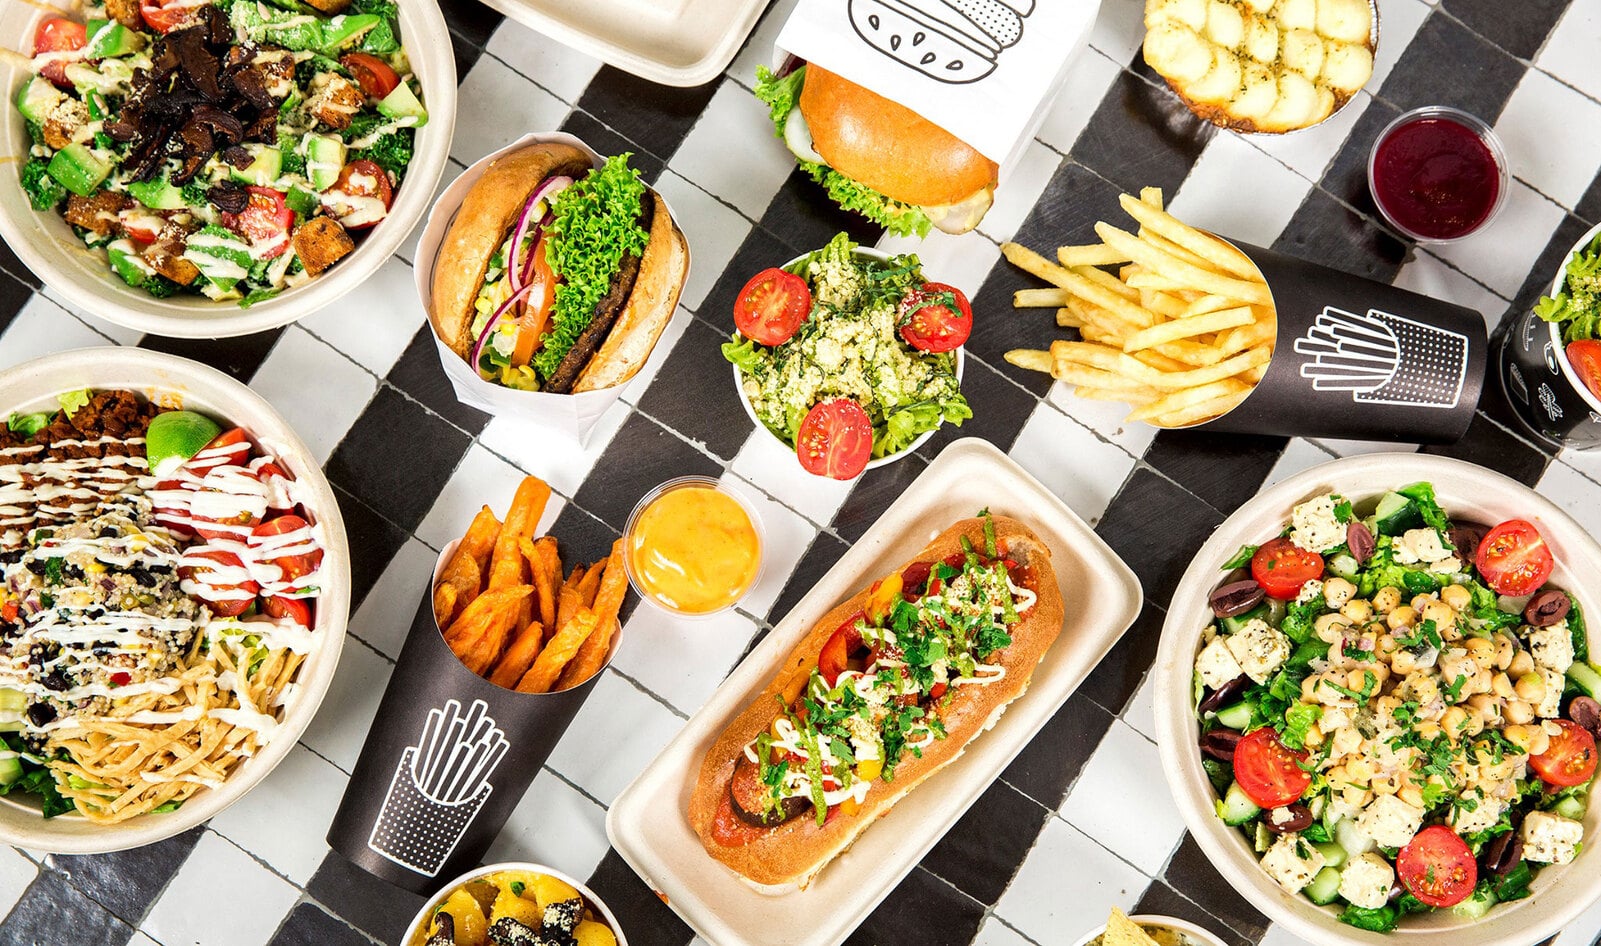 Vegan Chain by CHLOE Opens First Location in Canada